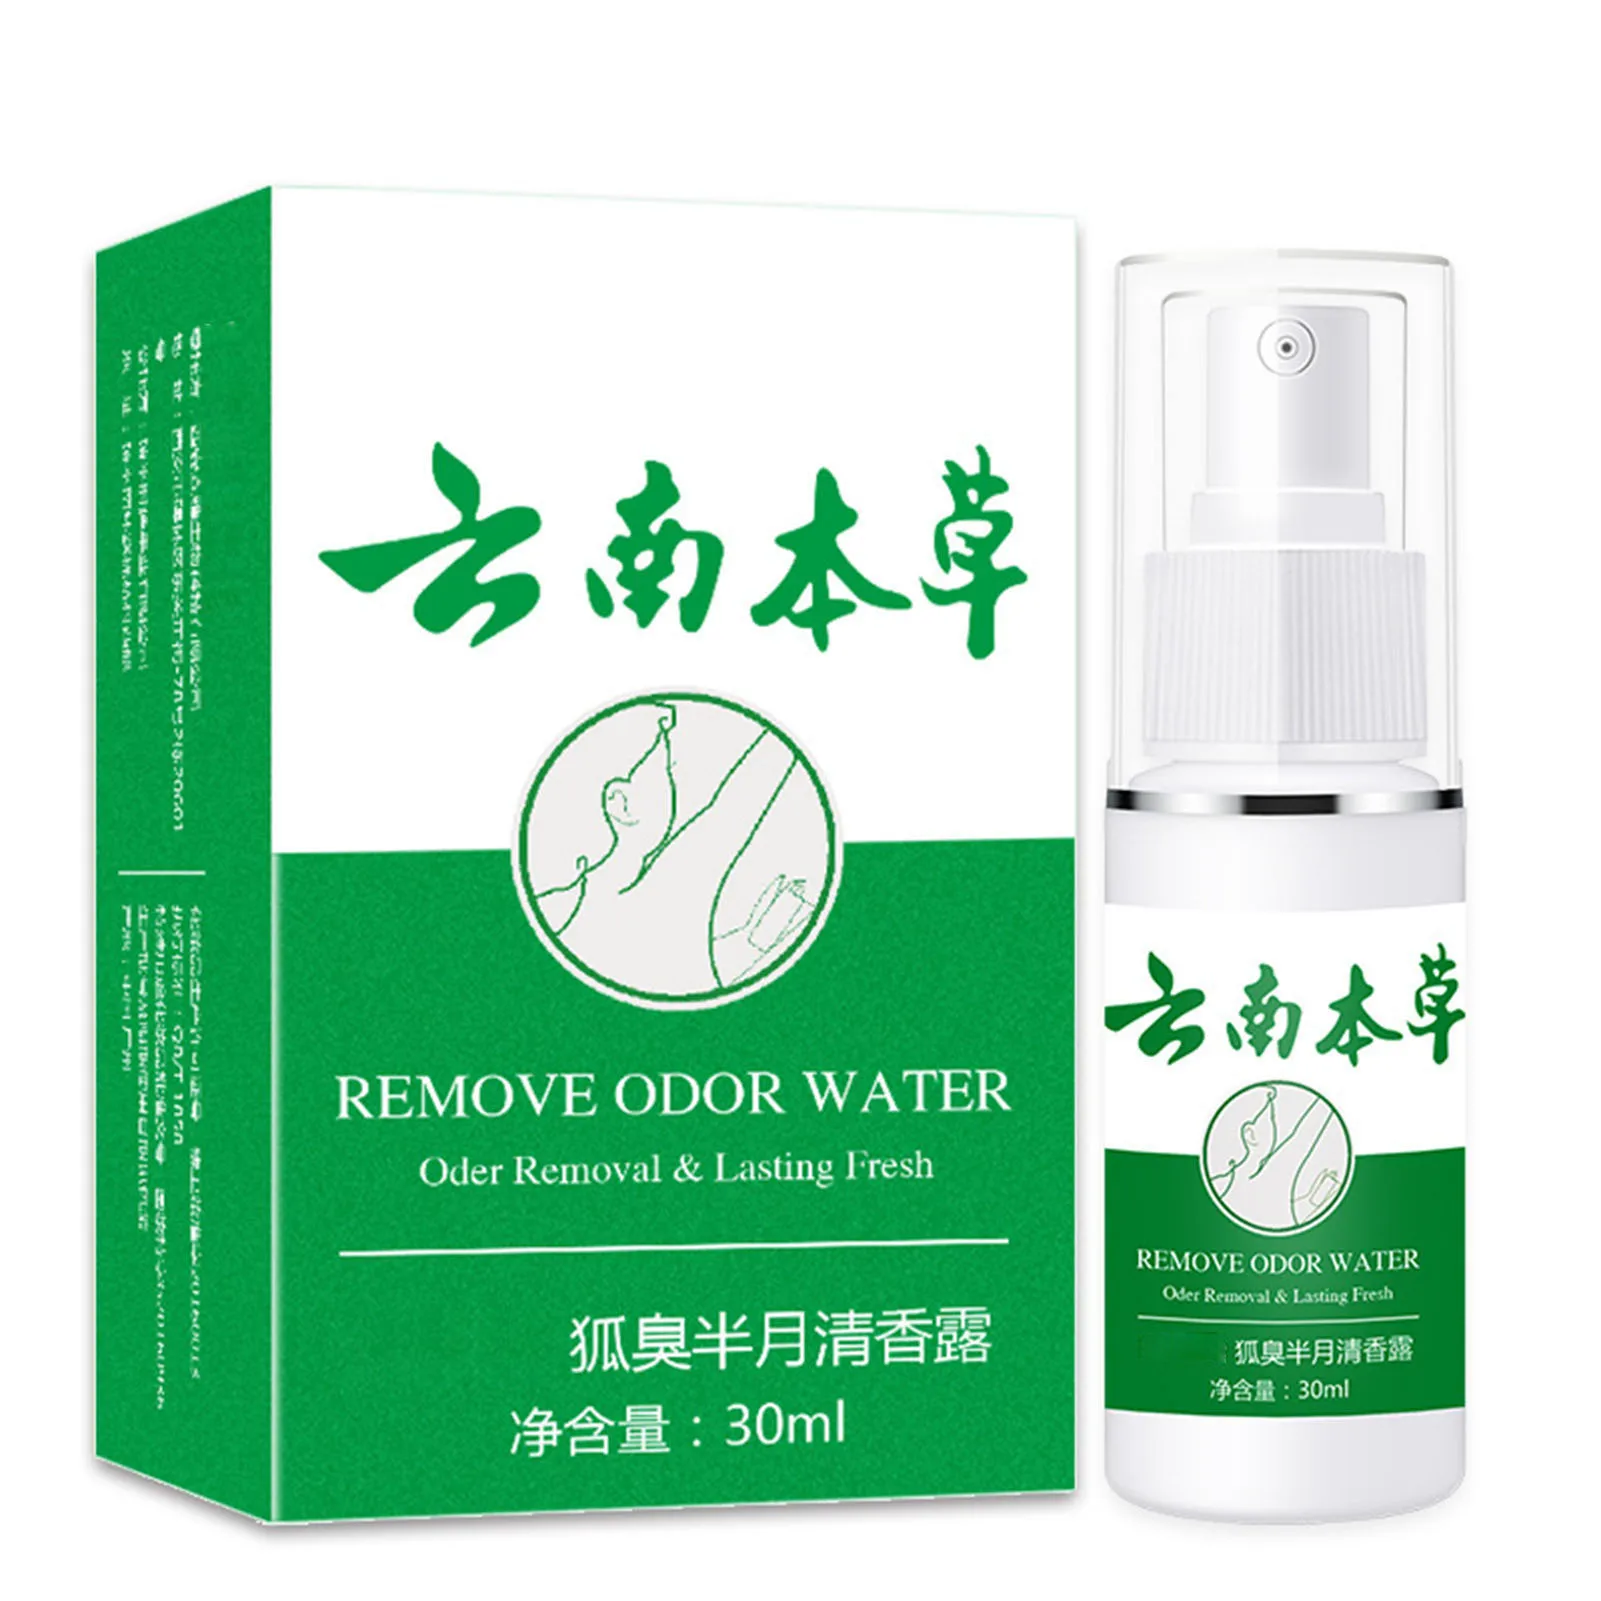 

30ml Underarm Odor Deodorant Spray Body Sweating and Odor Removal Spray for Dating Business Commuting